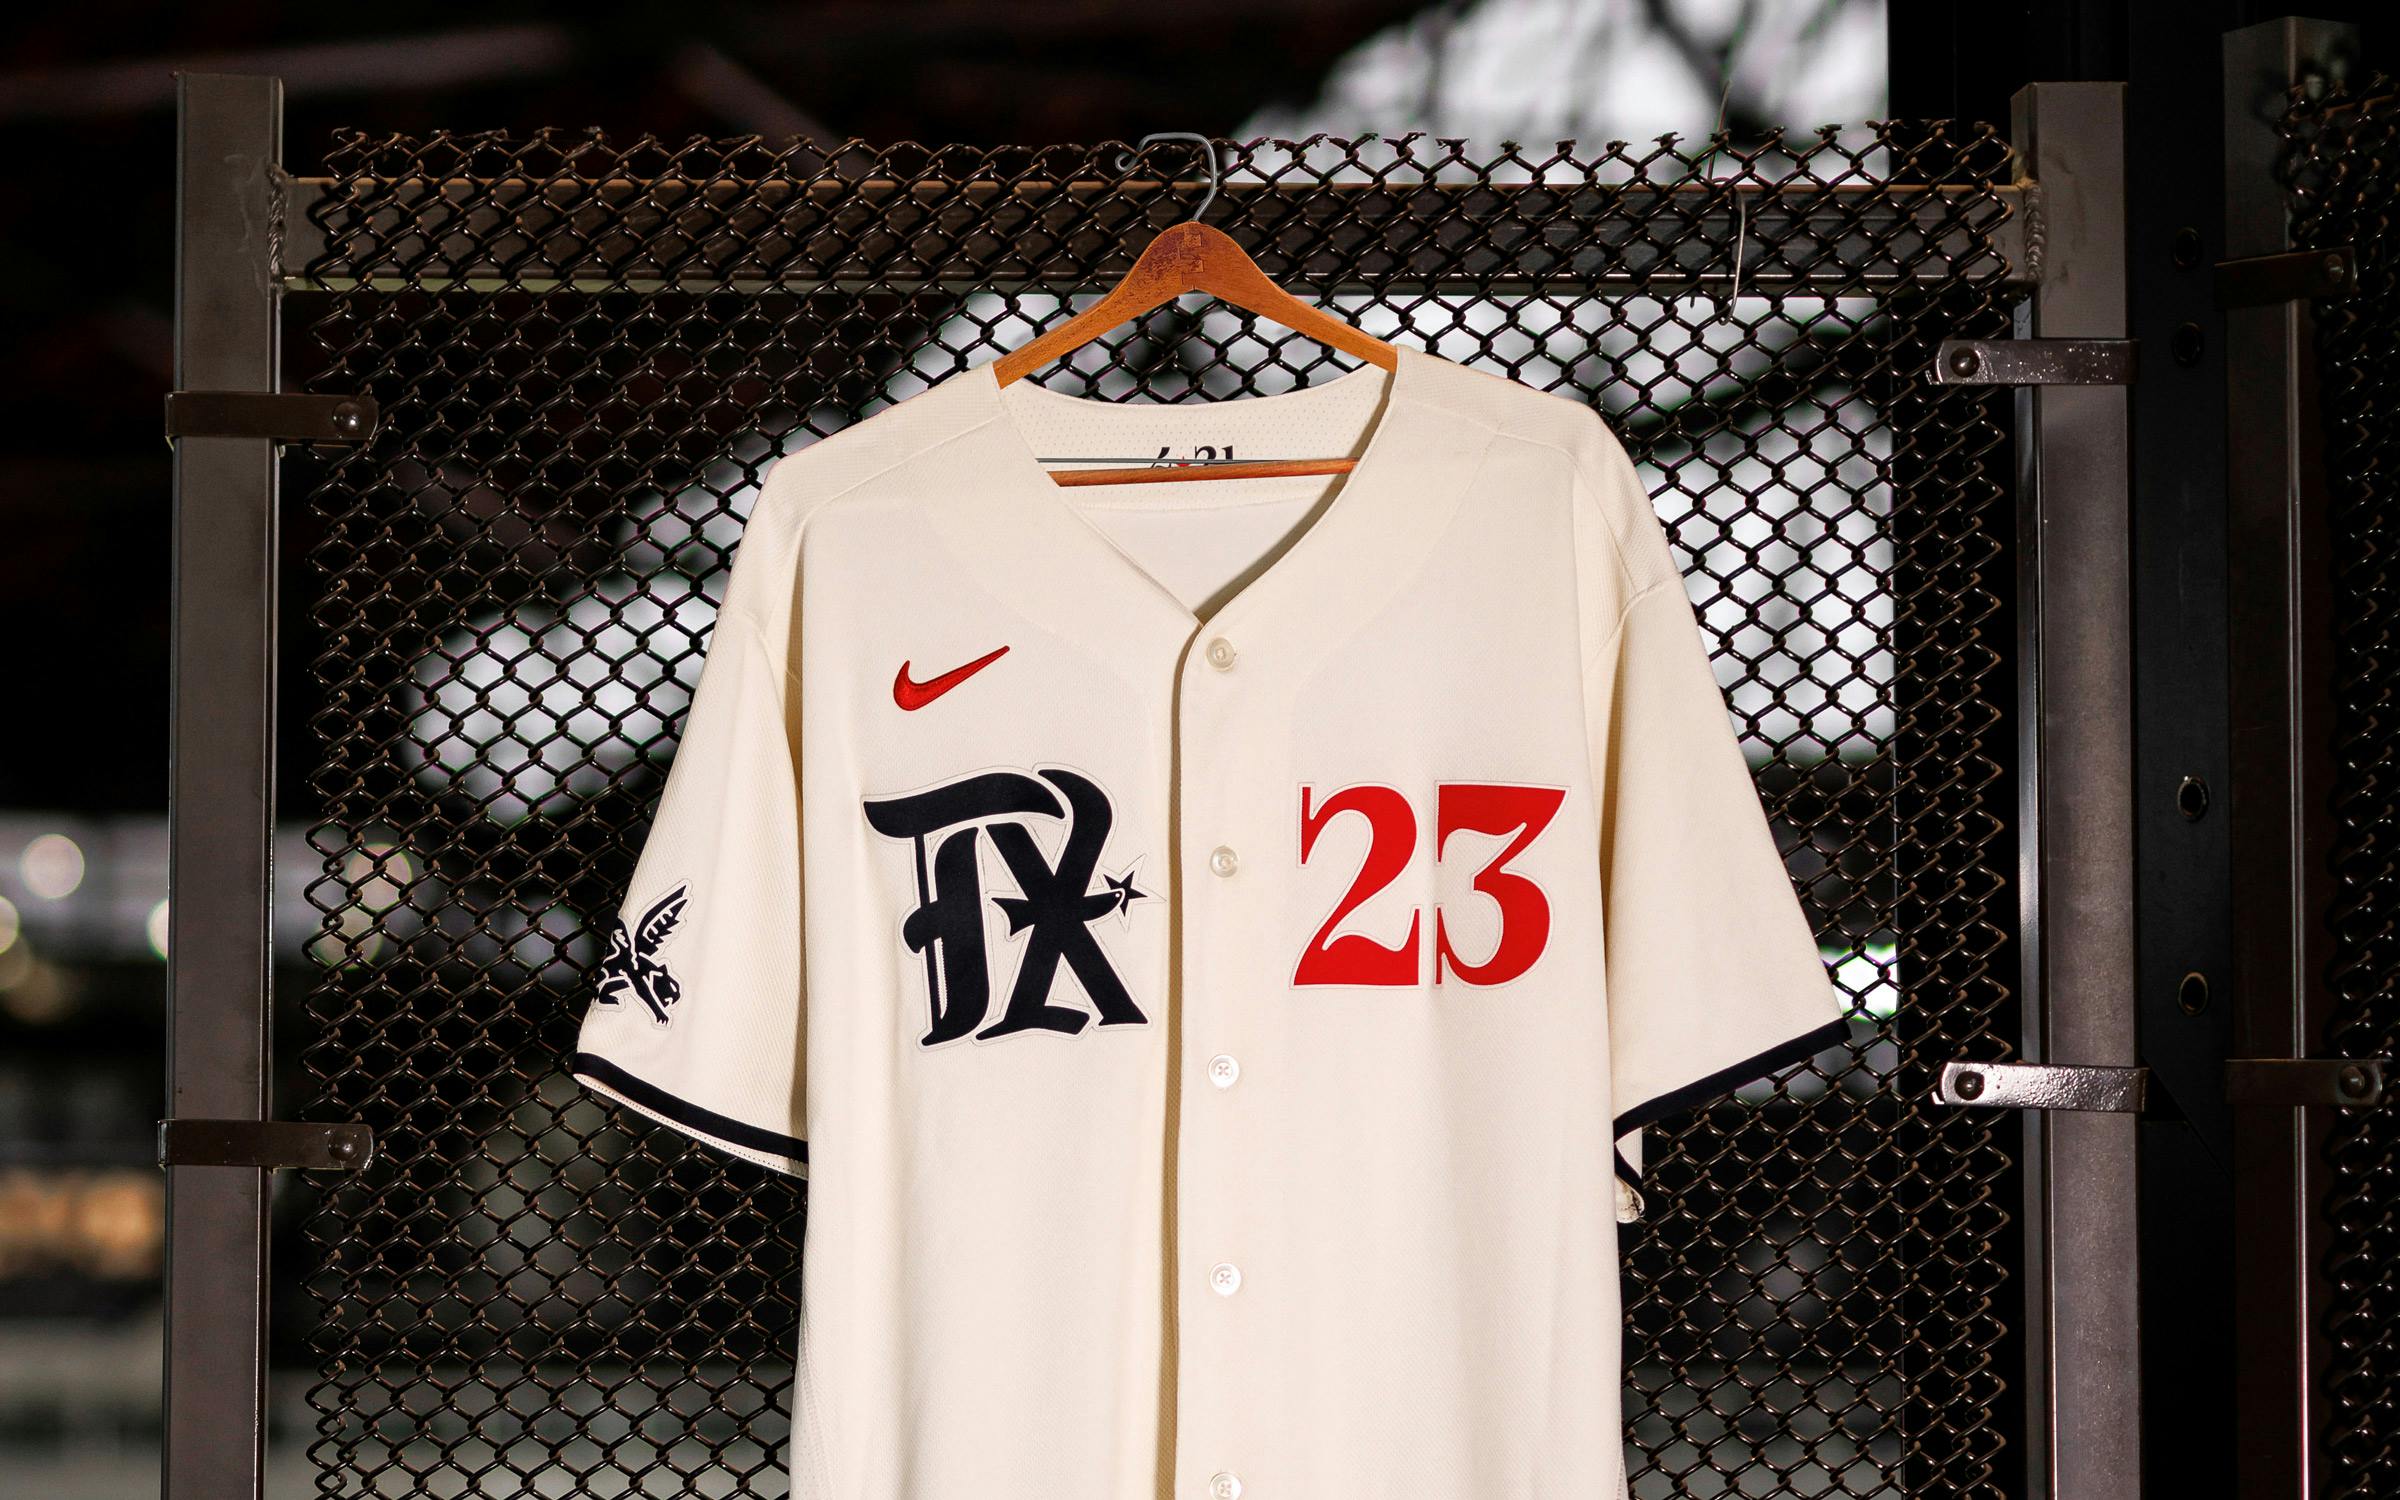 Here are MLB's 2021 All-Star jerseys - Covering the Corner